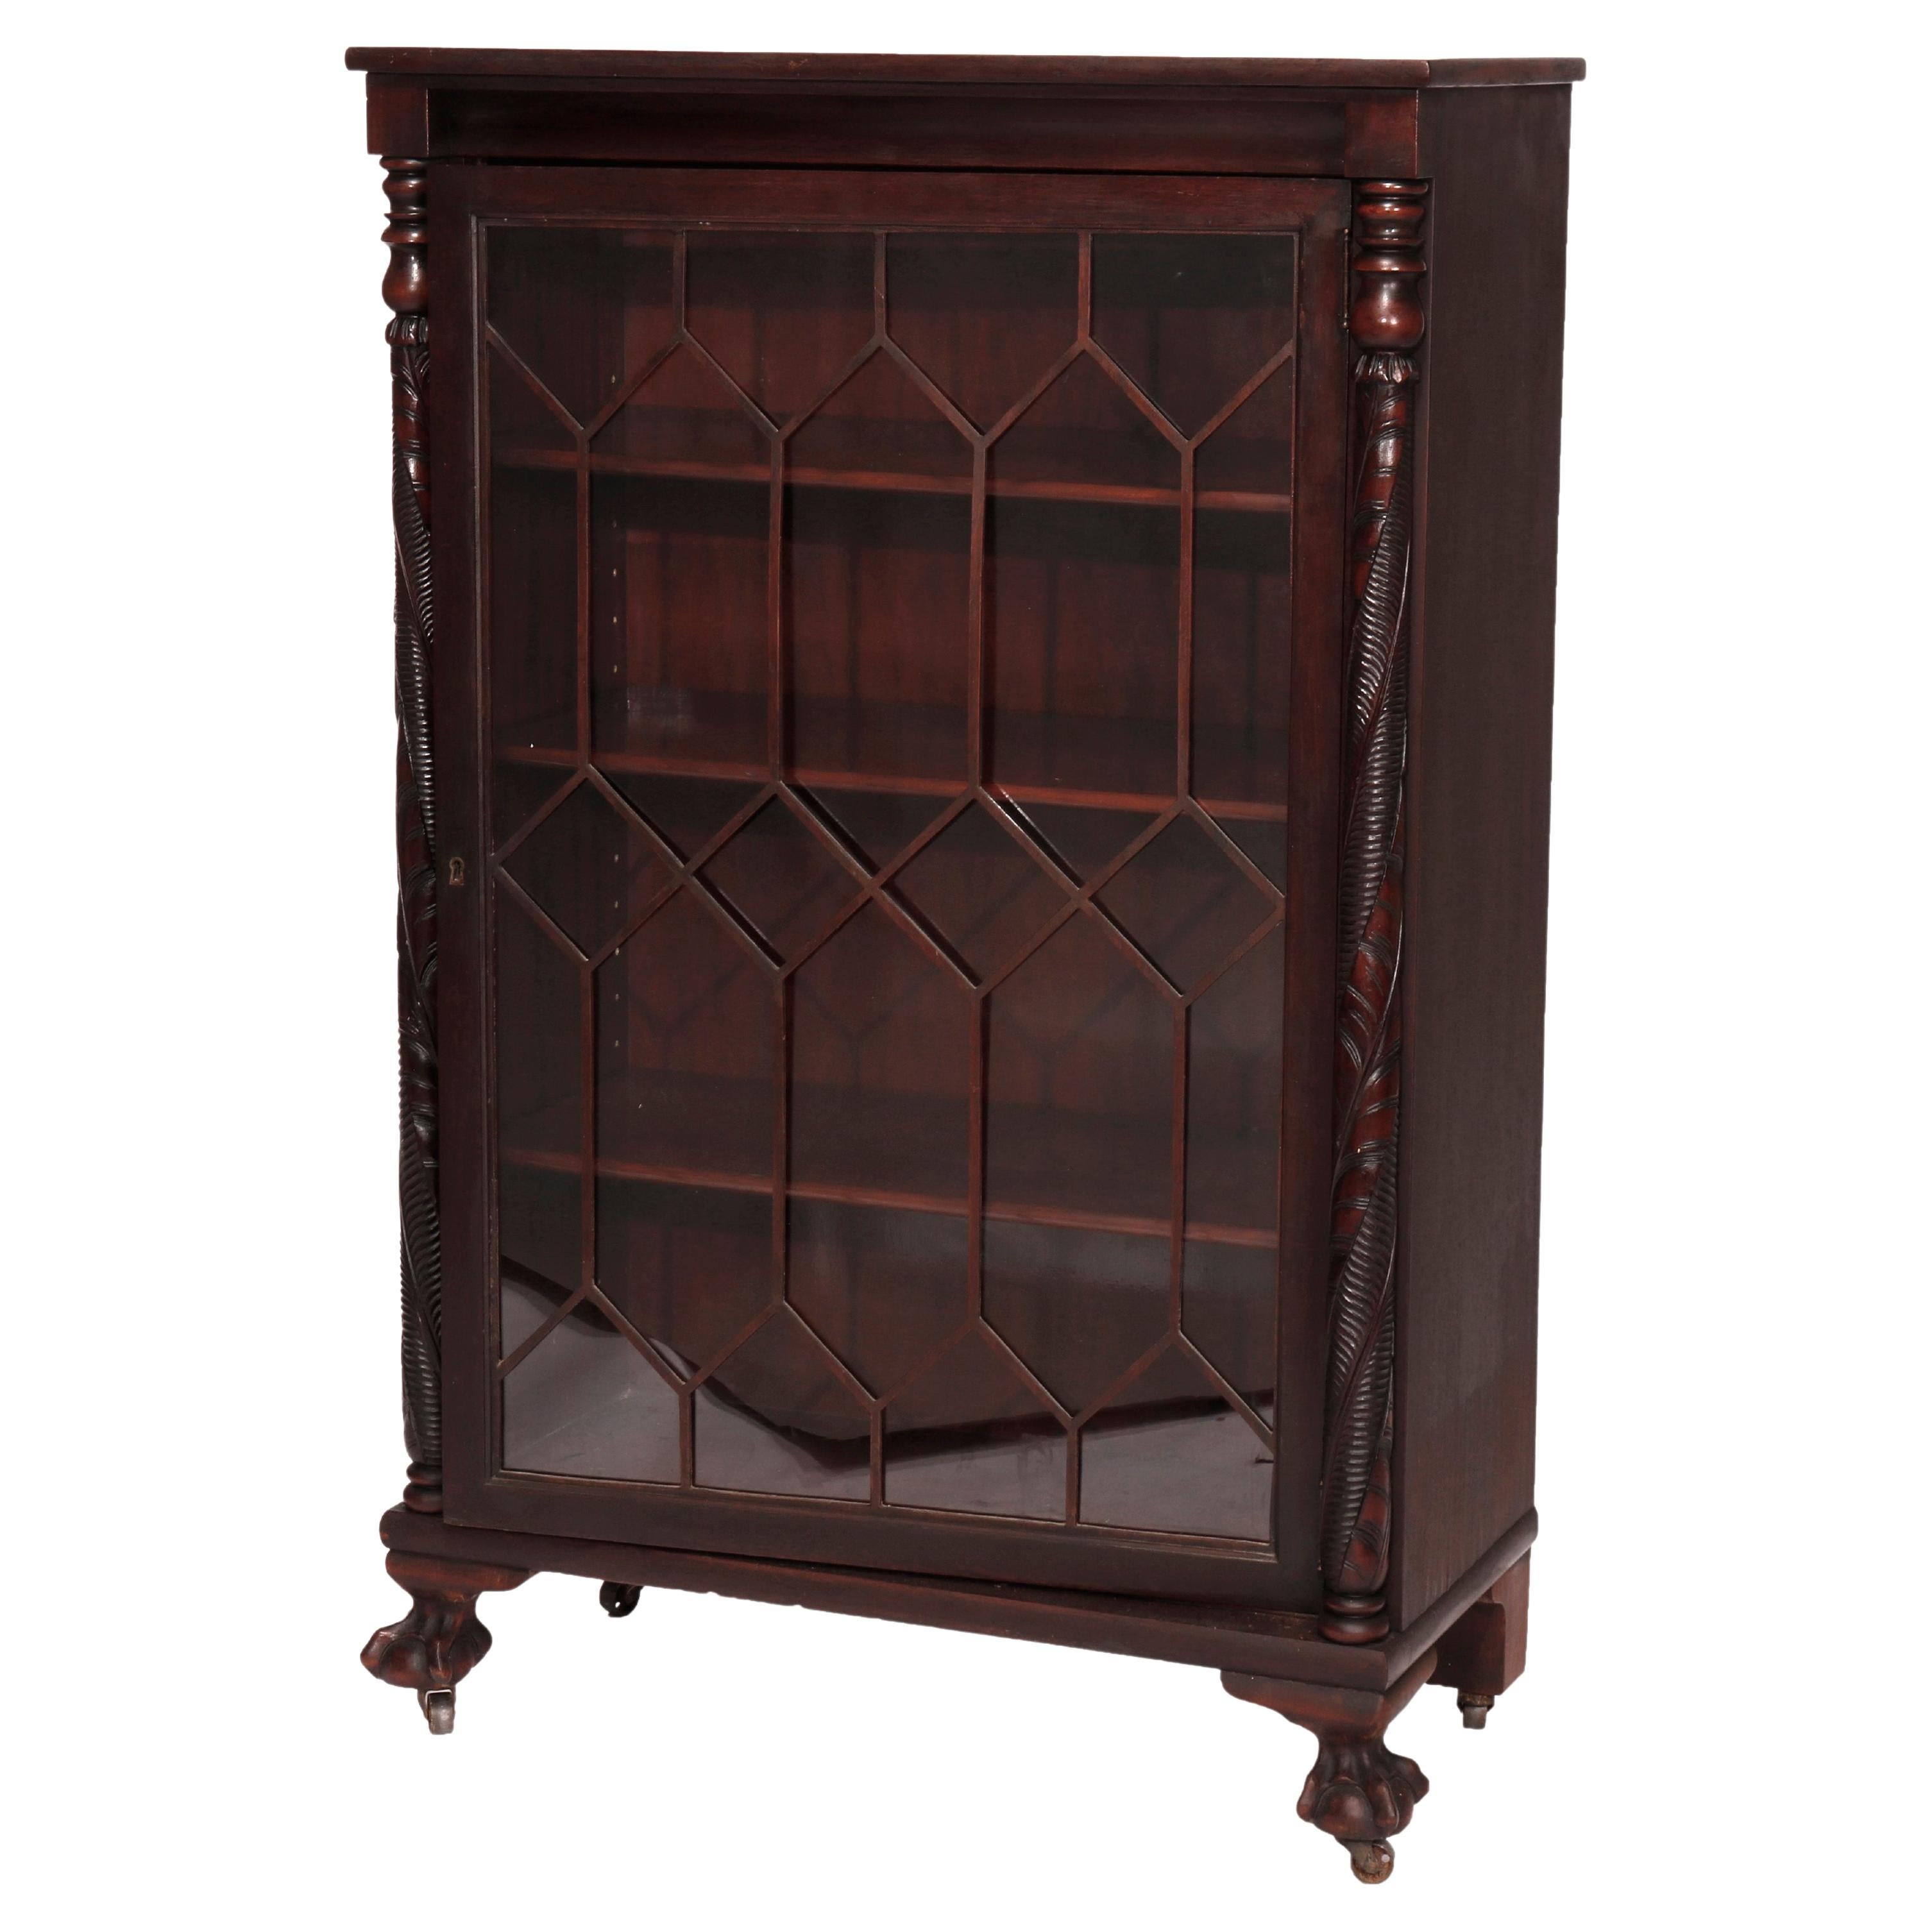 Antique Greco Classical American Empire Acanthus Carved Mahogany Bookcase, c1920